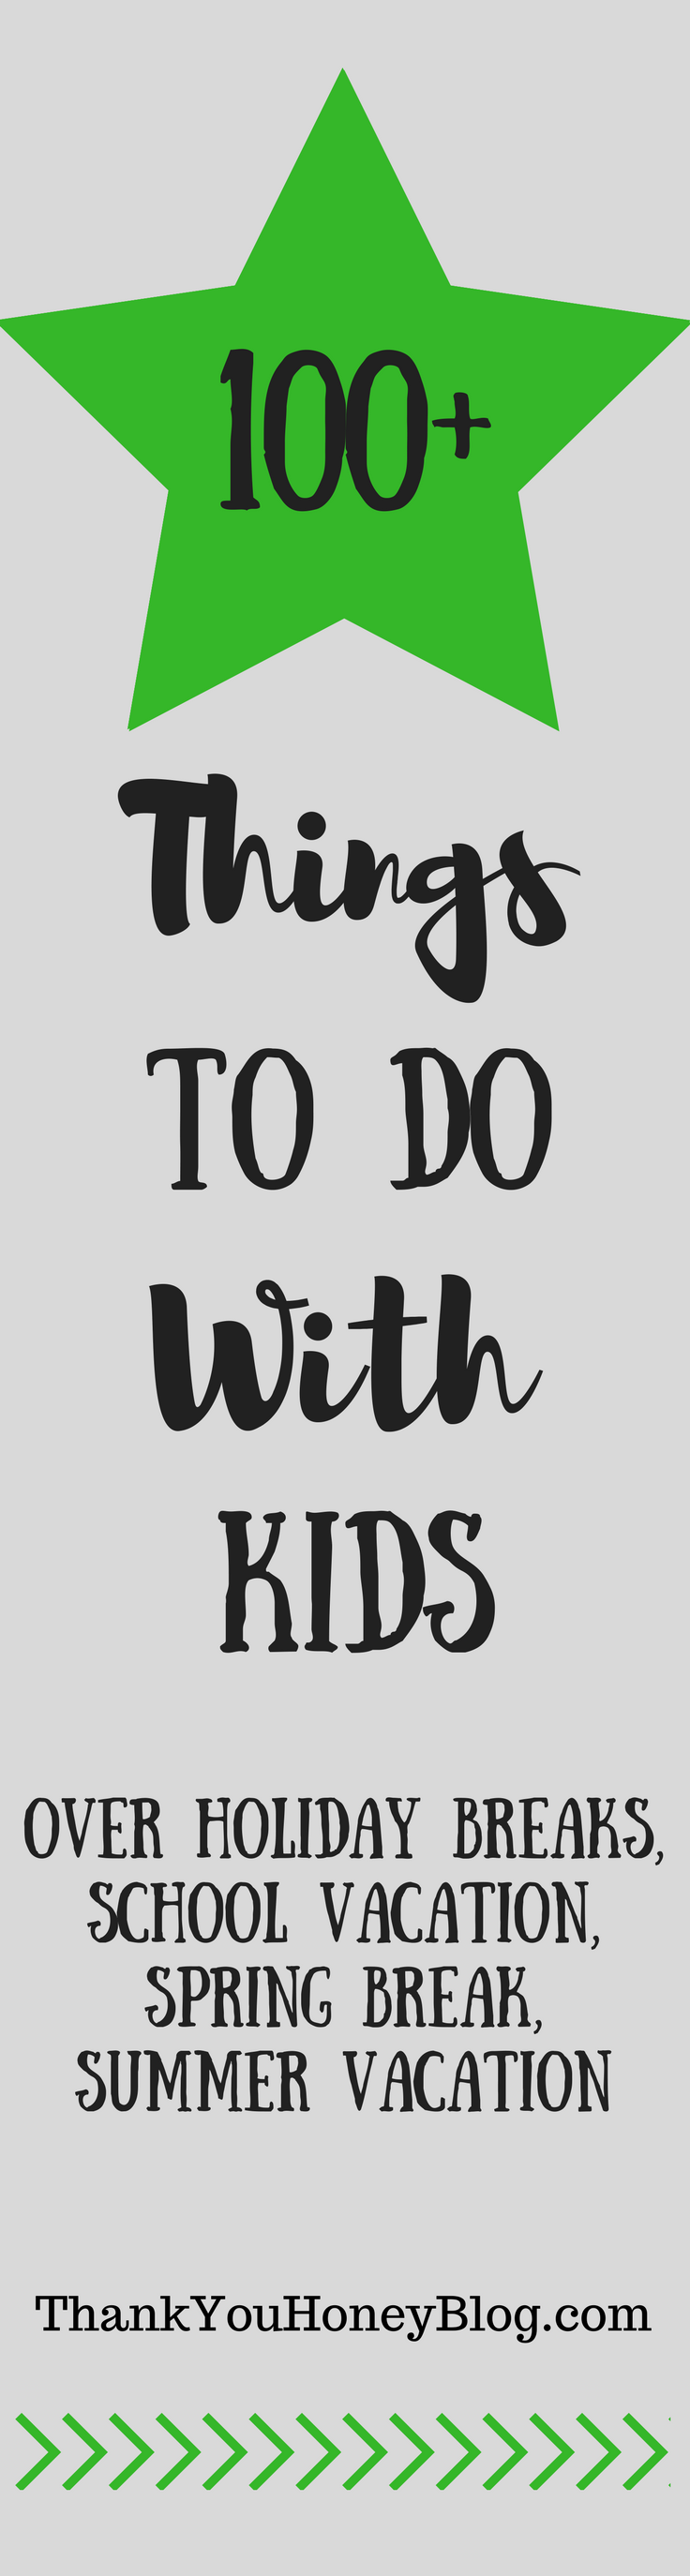 100+ Things To Do With Kids Over School Break